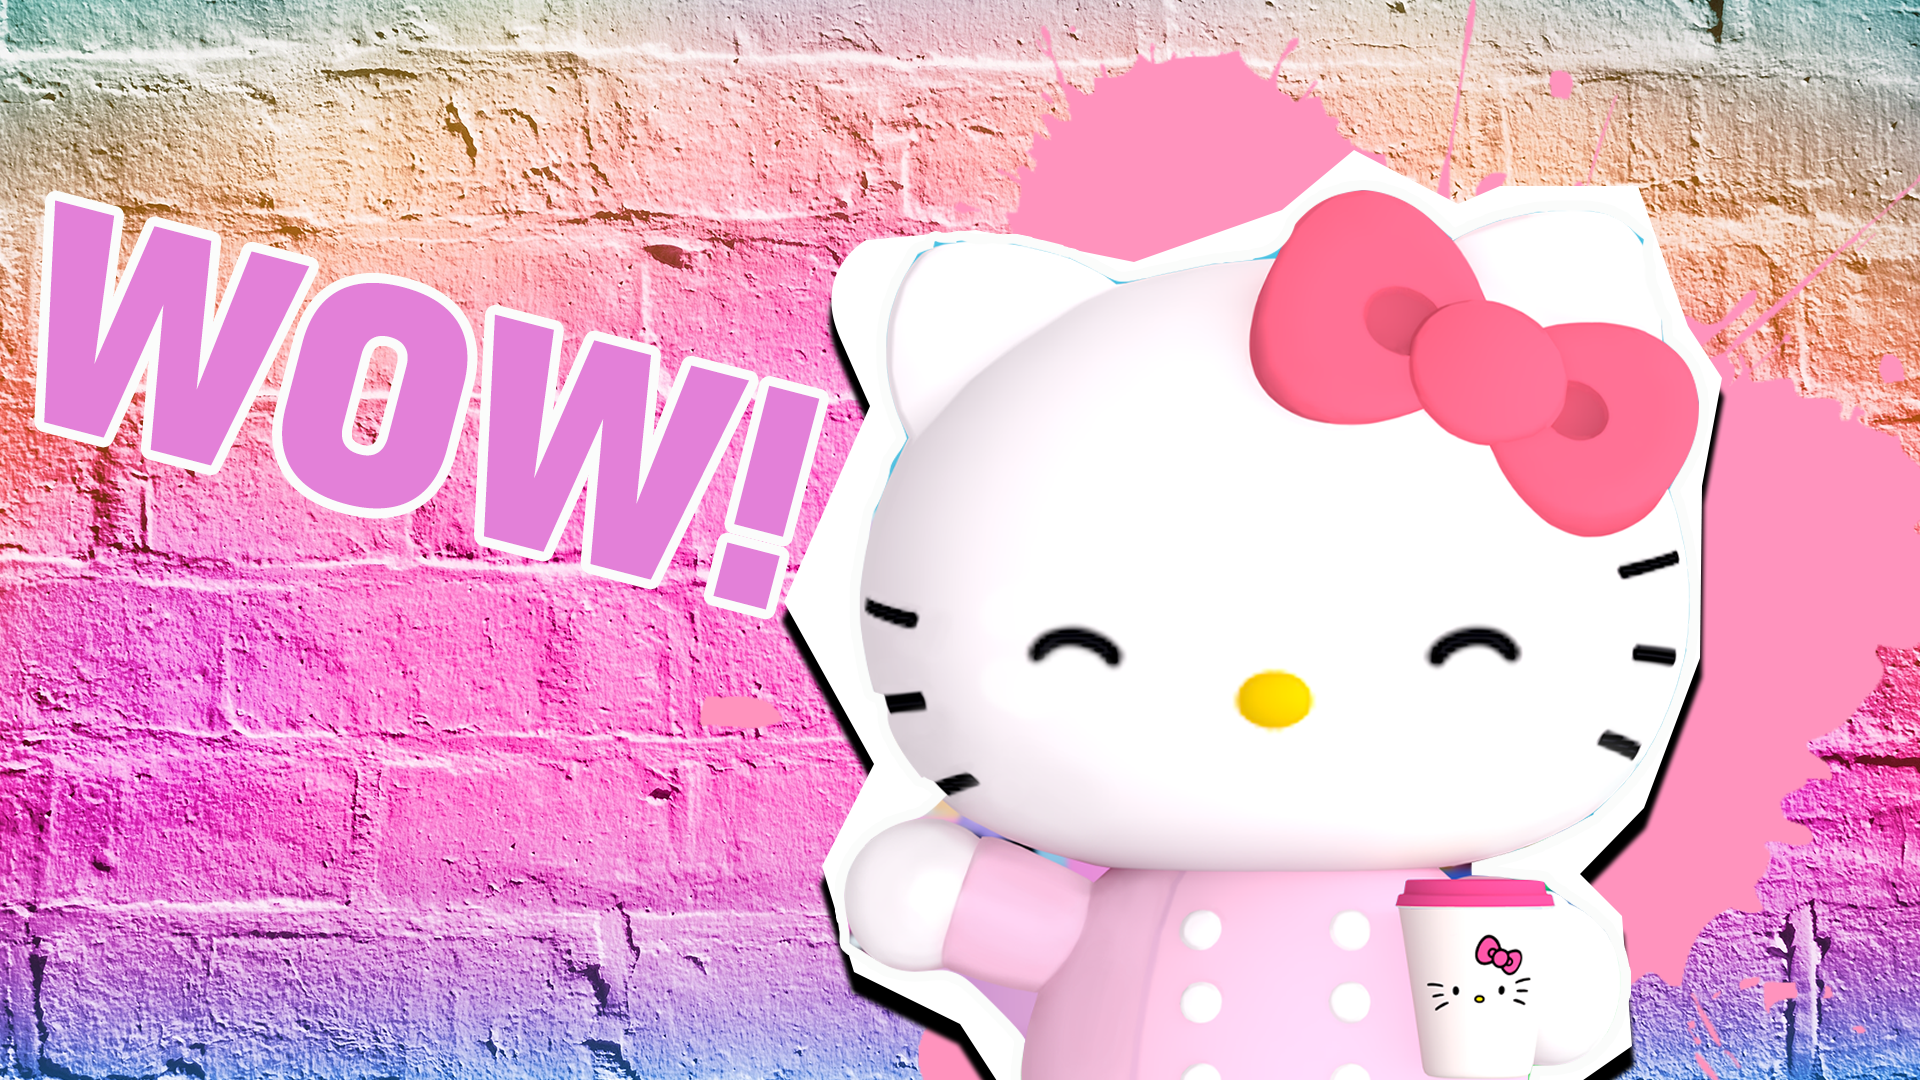 Incredible! You're officially the biggest Hello Kitty fan, because you got 100% in this Roblox quiz! Congrats!